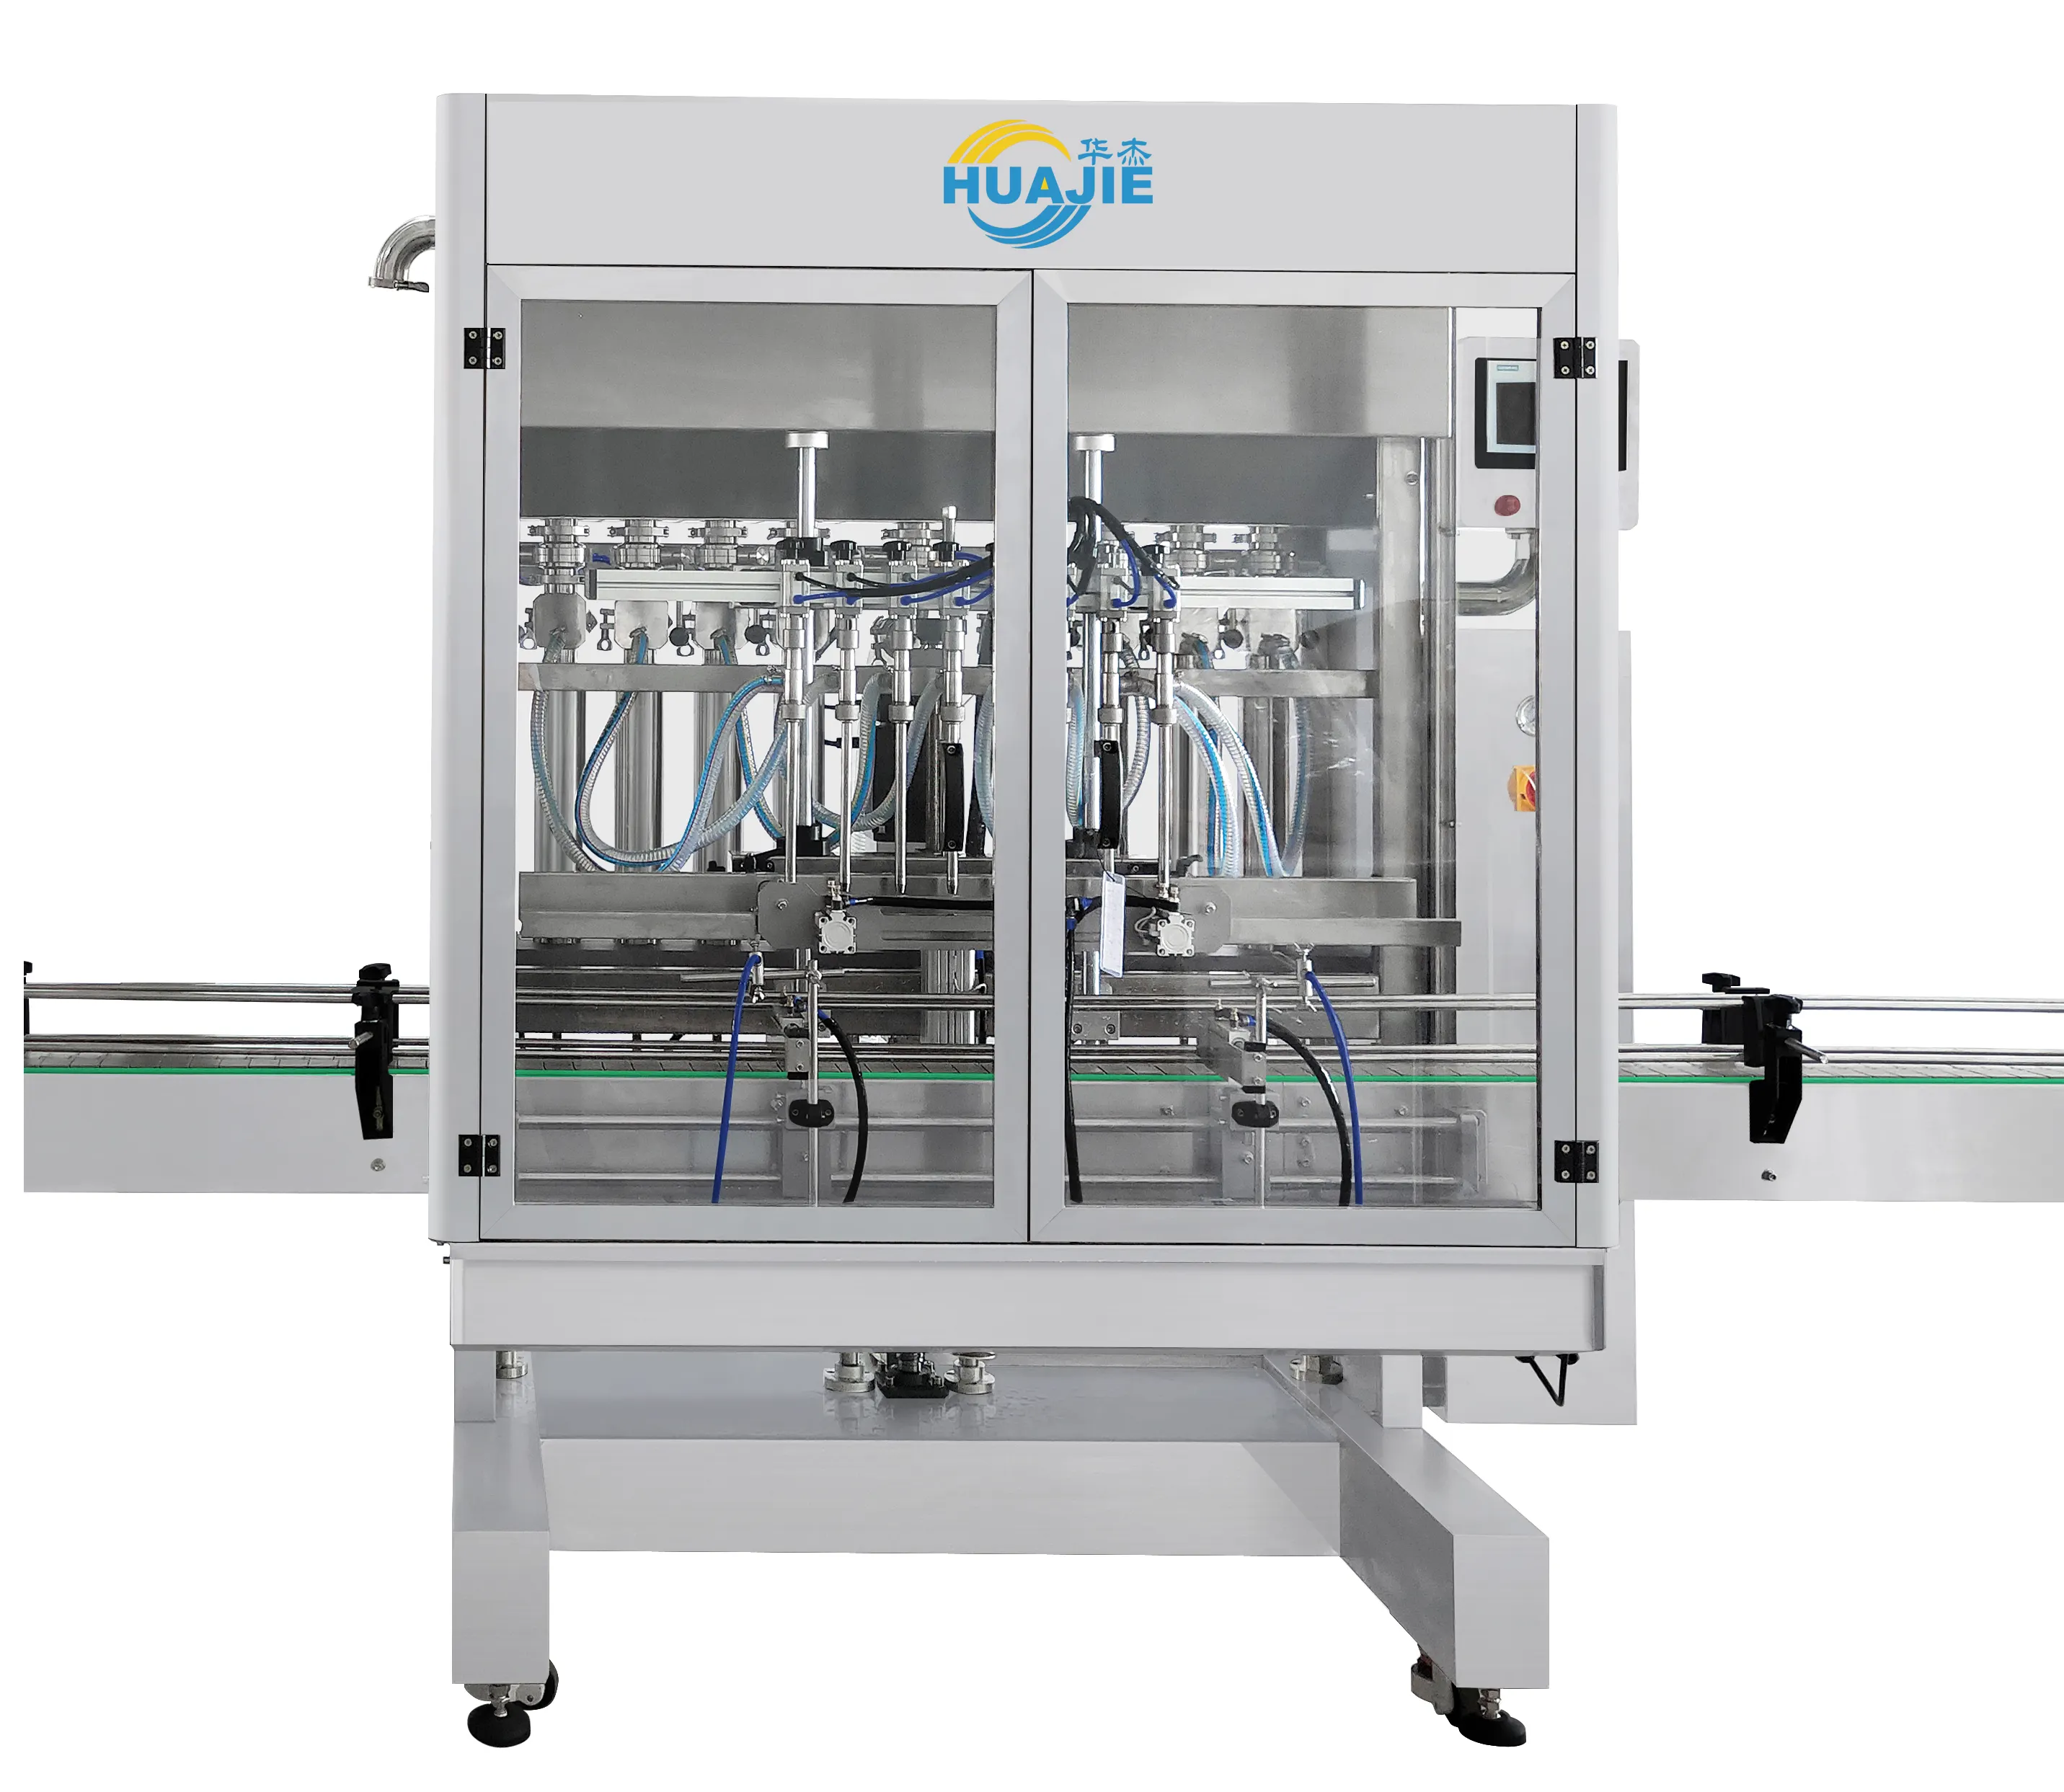 HUAJIE Hot Sale Automatic High Accuracy Piston 14 Nozzles Liquid Soap Shampoo Plastic Bottle Filling And Capping Machine